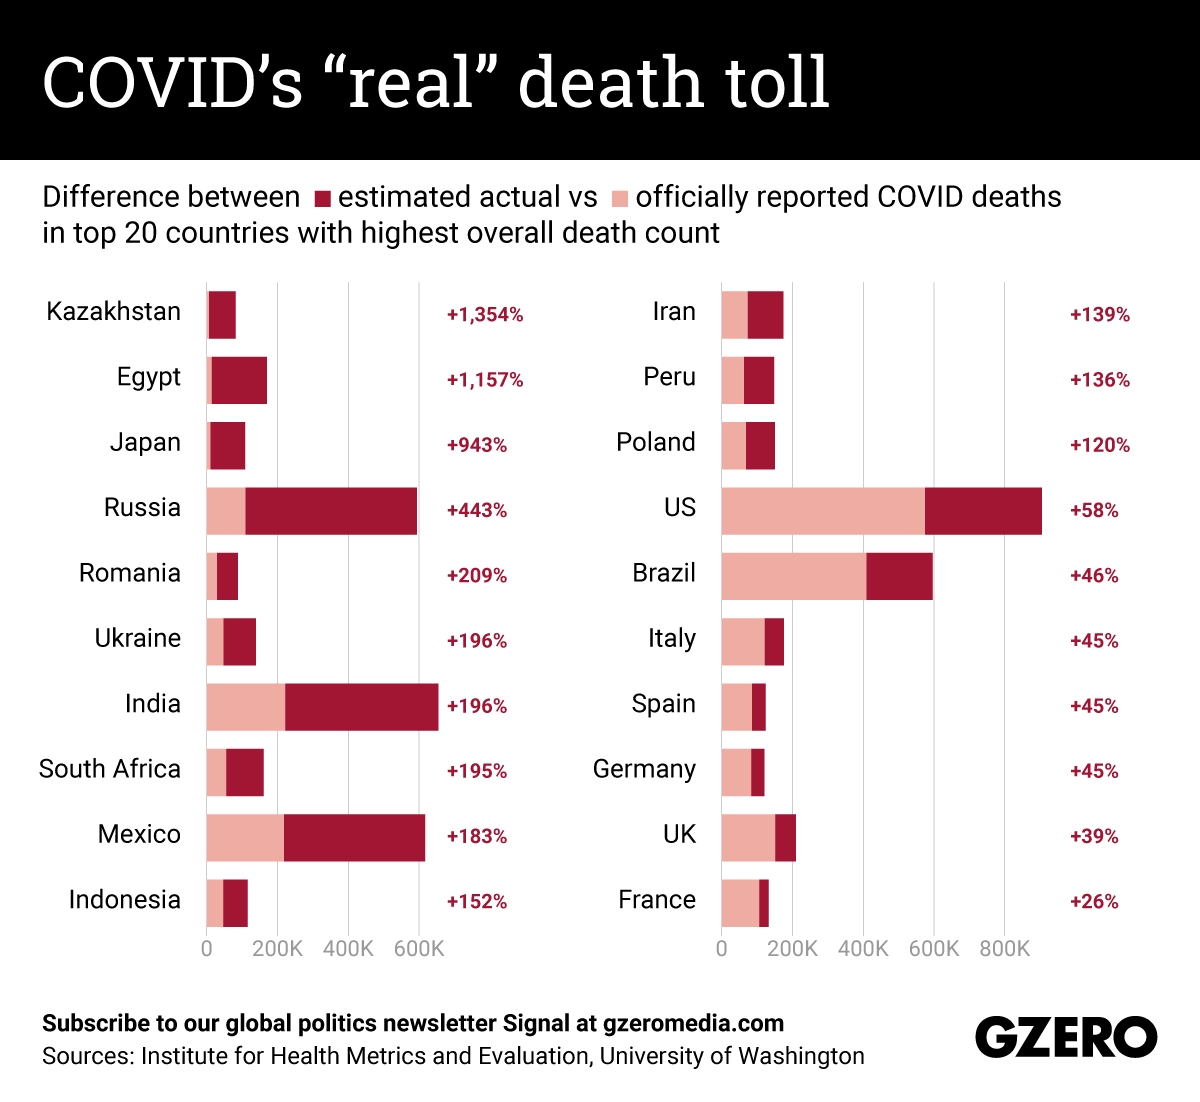 The Graphic Truth: COVID's "real" death toll